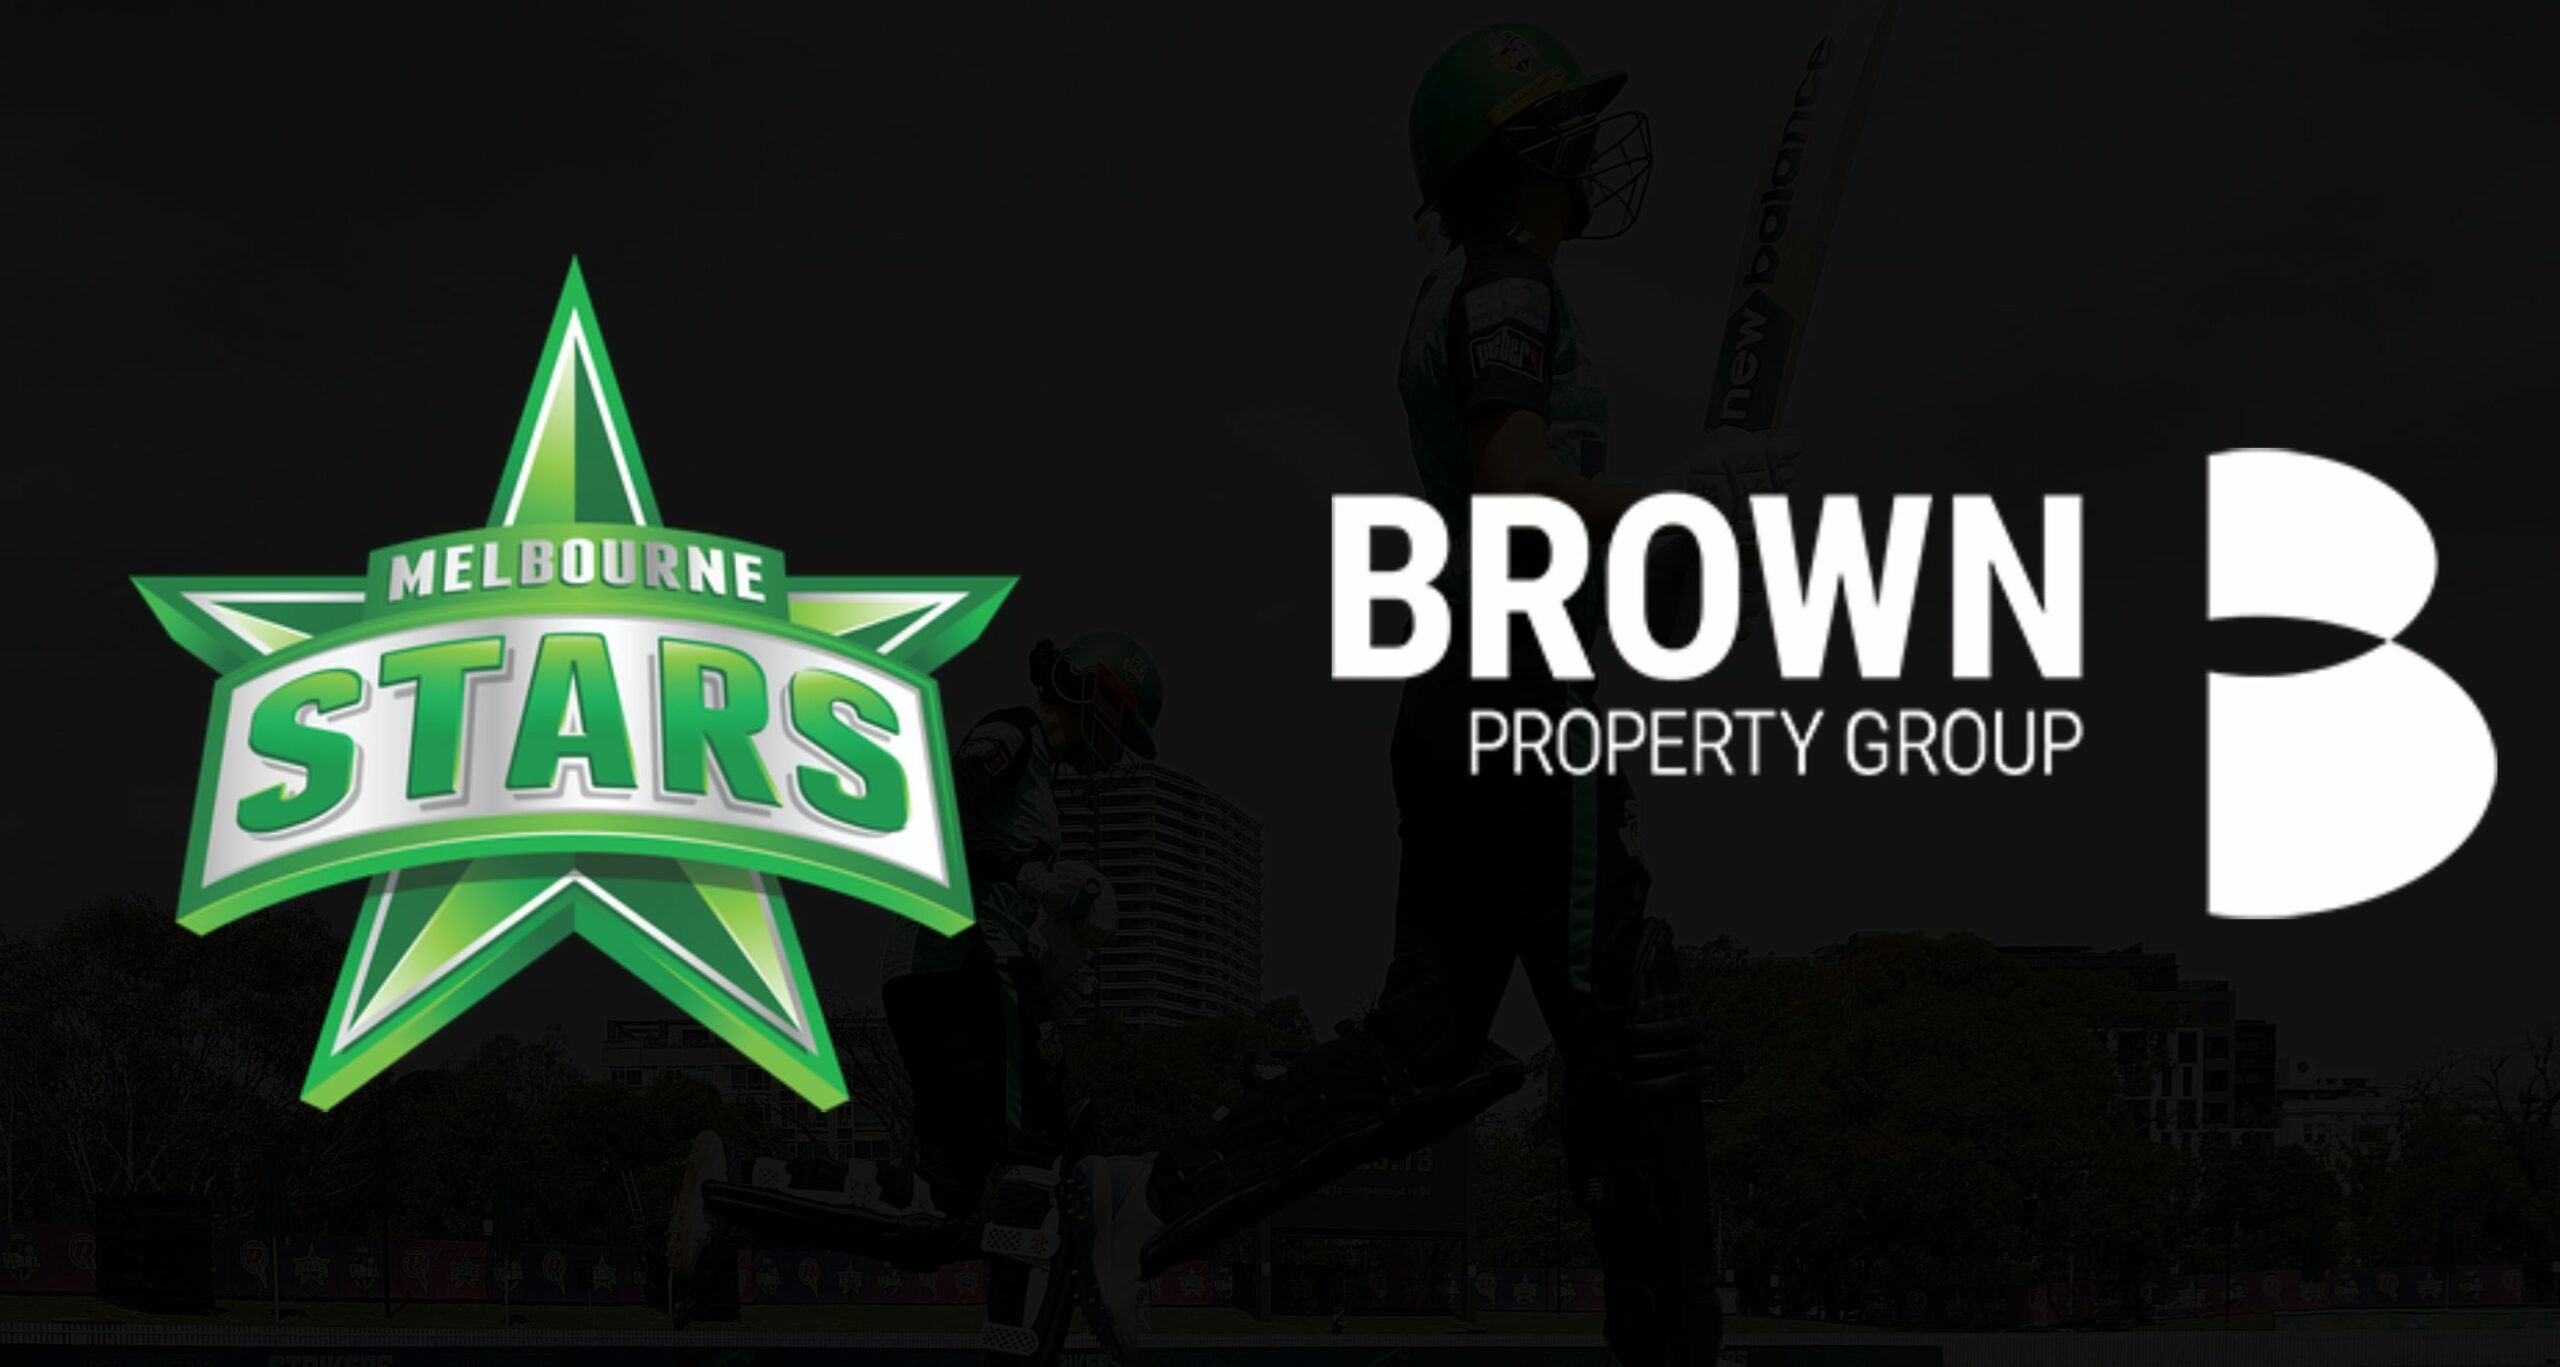 Alice Capsey gets picked by Melbourne Stars for WBBL 2022 - Female Cricket